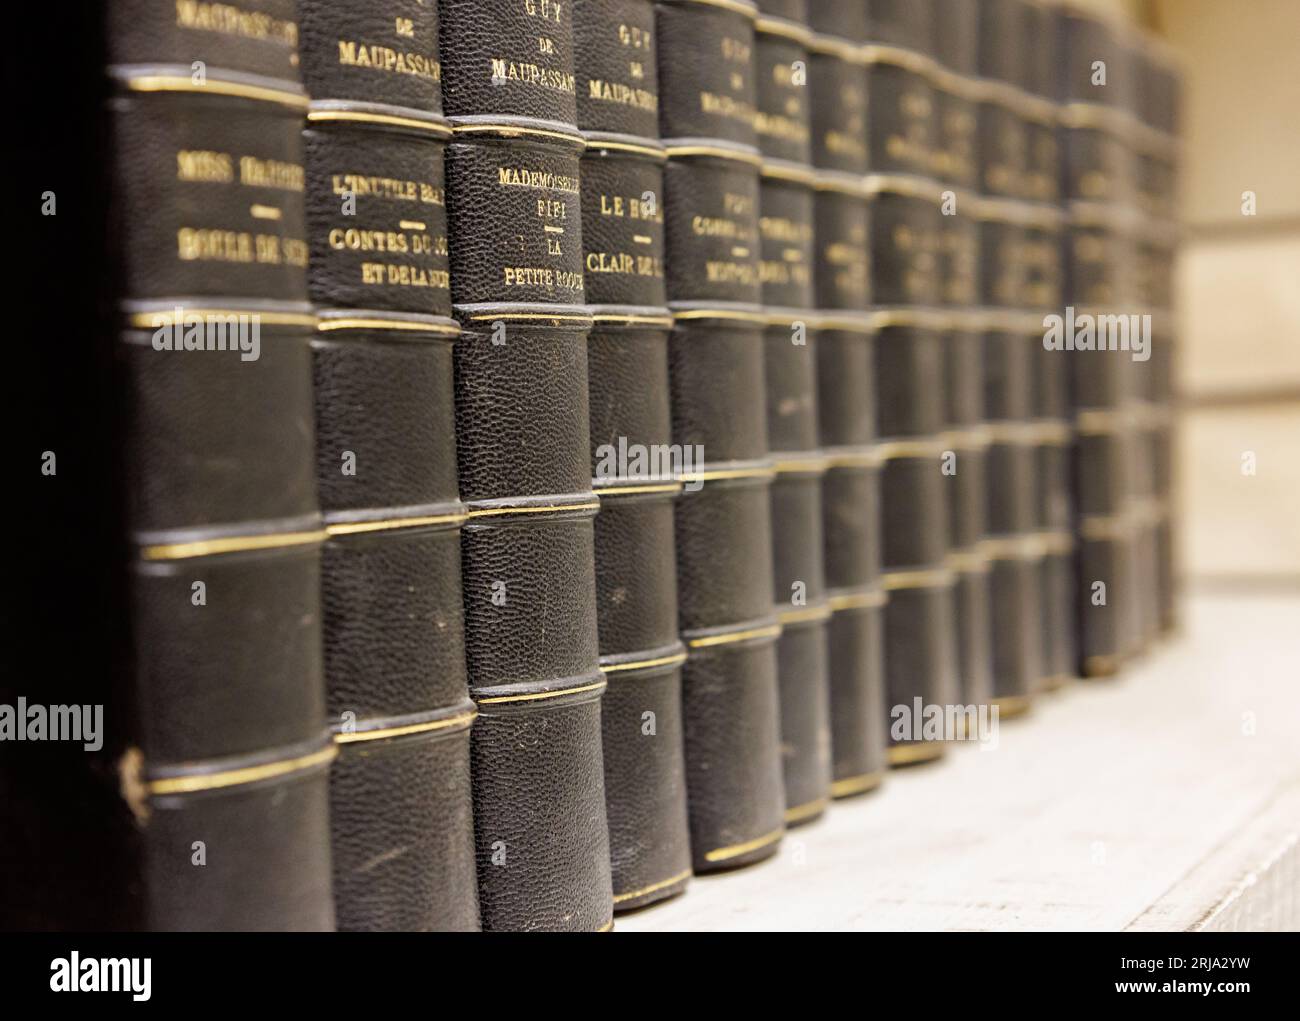 Row of old books Stock Photo